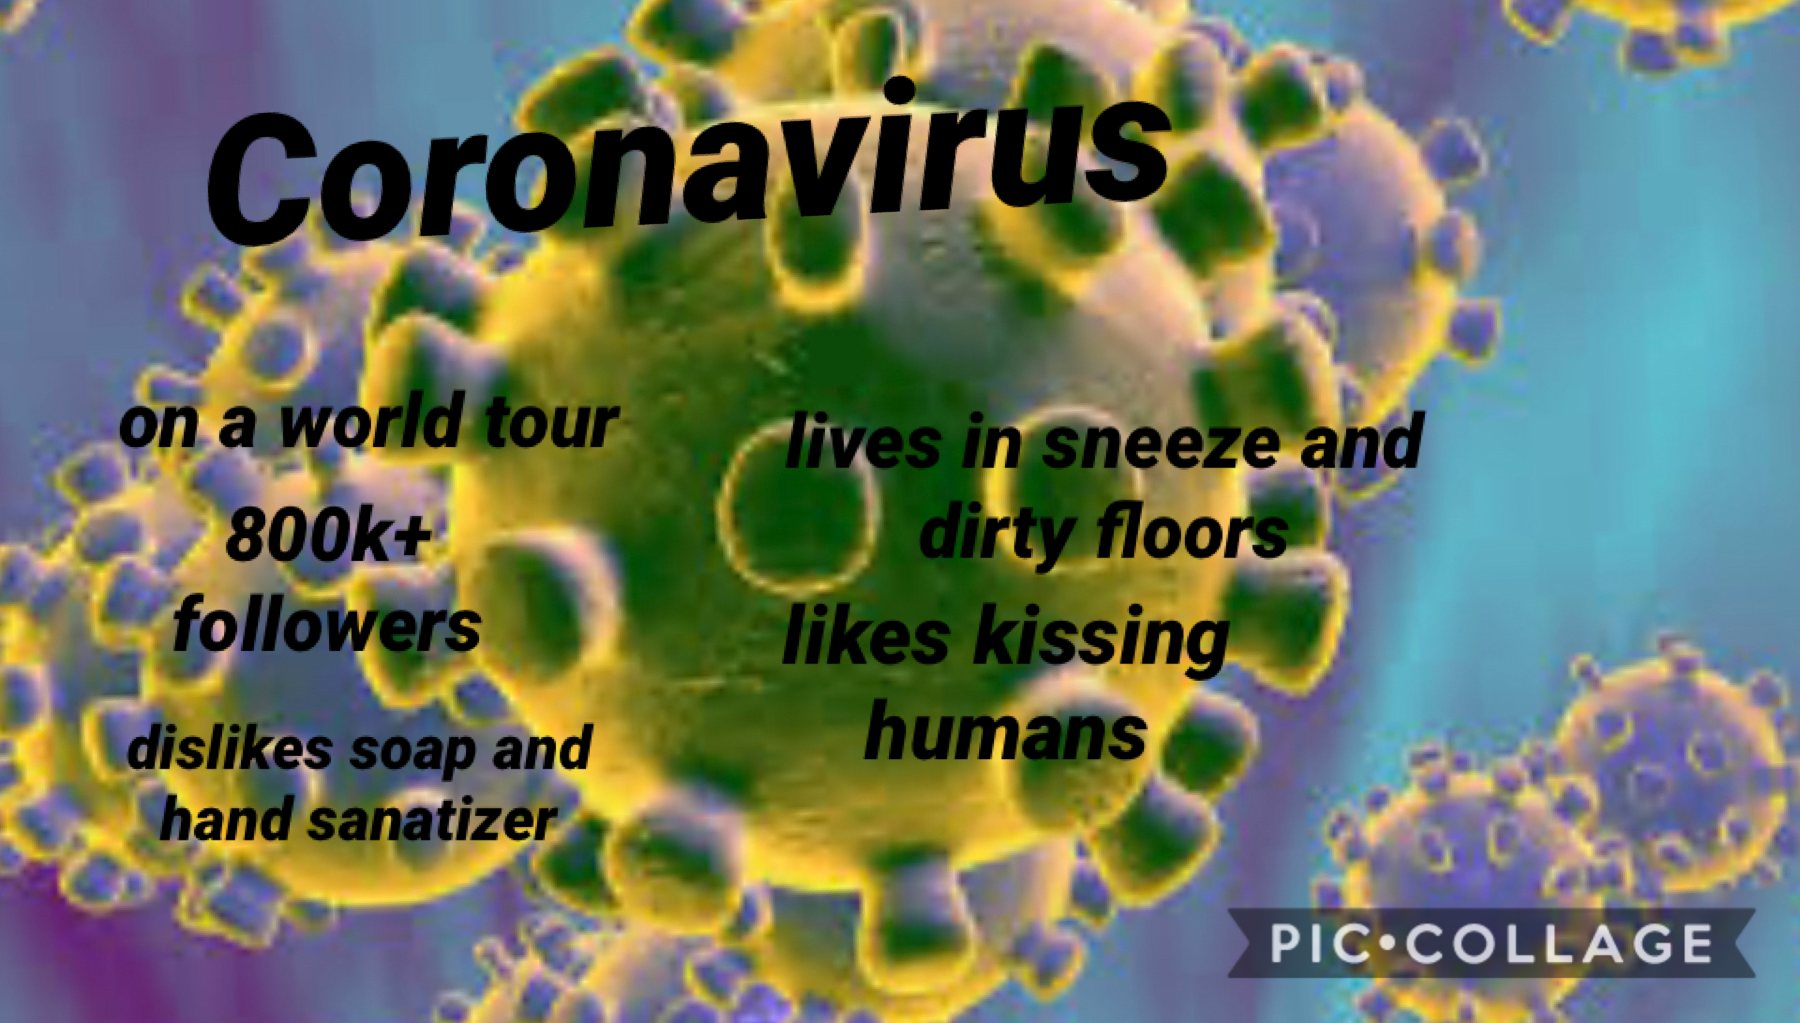 👑🦠Tap🦠👑









Stay at home
Wash your hands
Un-Follow Coronavirus
Use hand sanatizer
1 meter distance